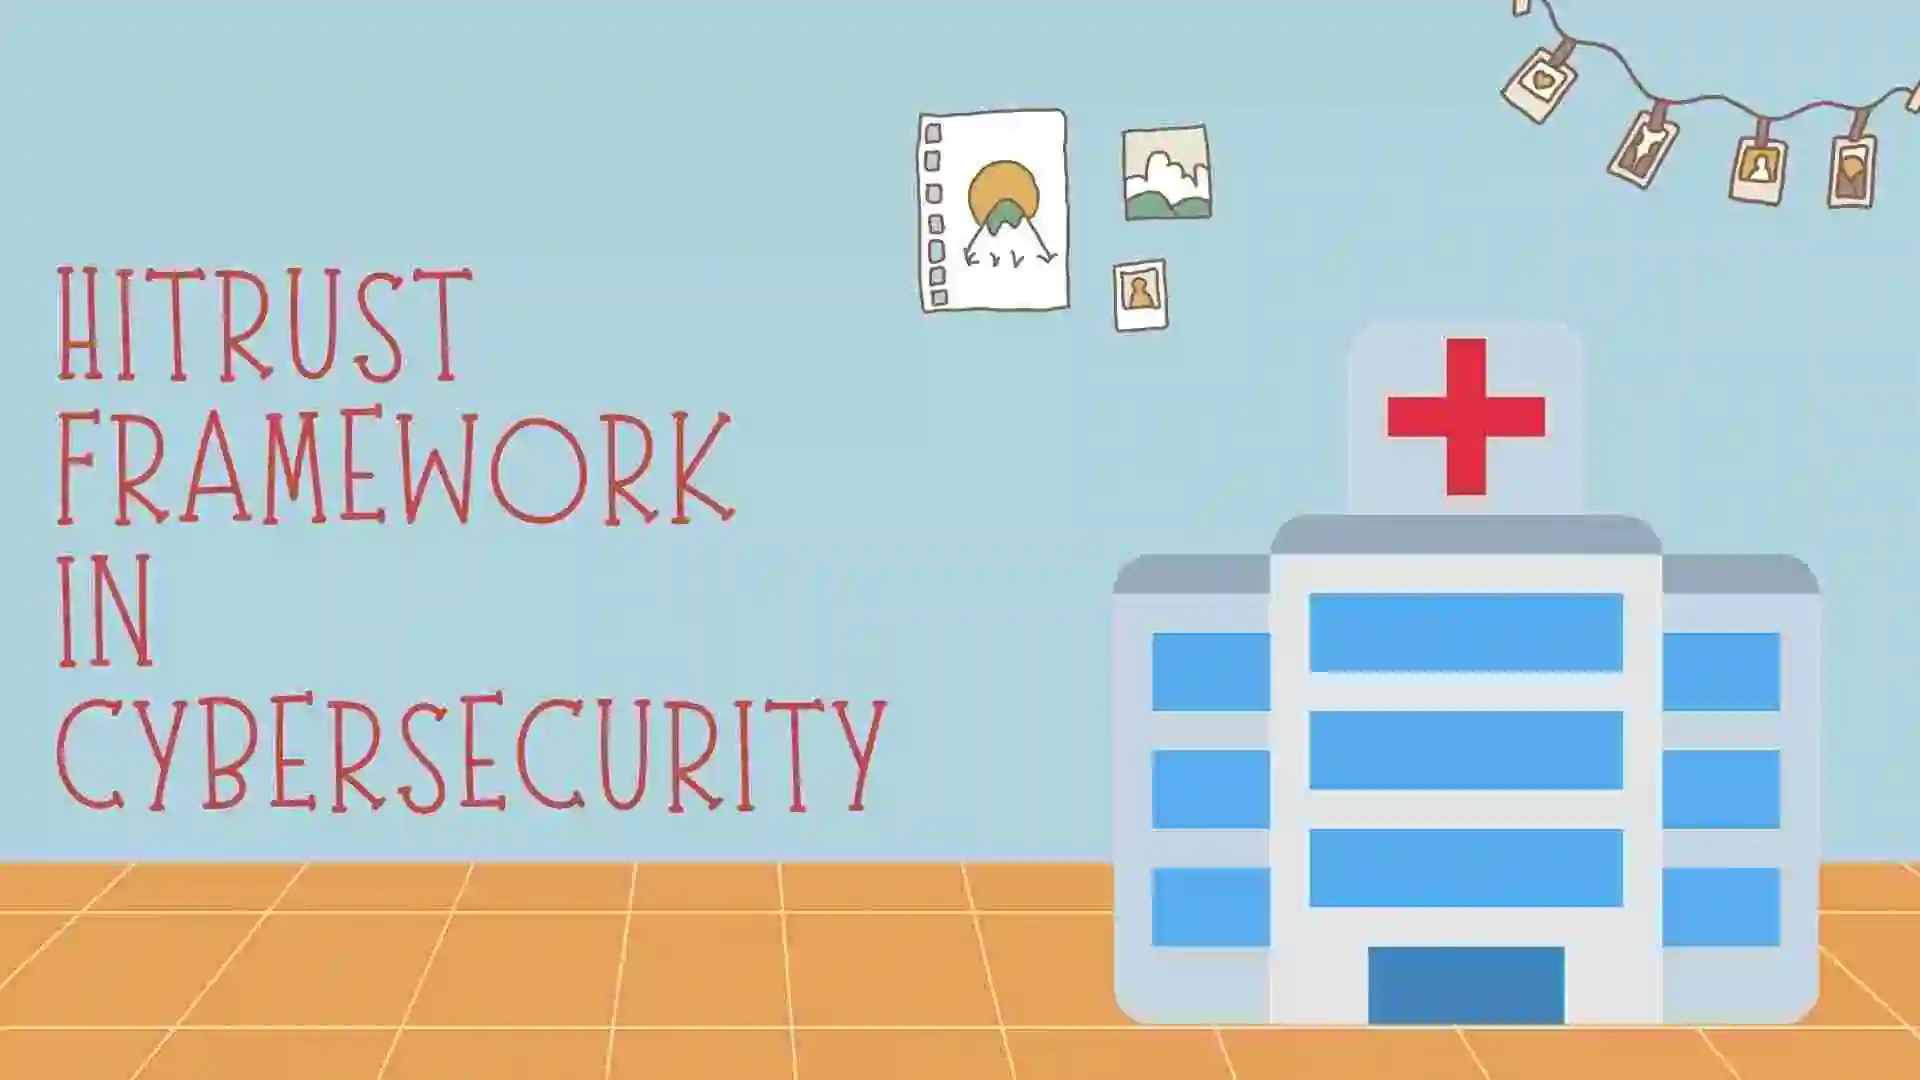 HITRUST framework offers a approach to information security and privacy management, specifically tailored to the healthcare industry.